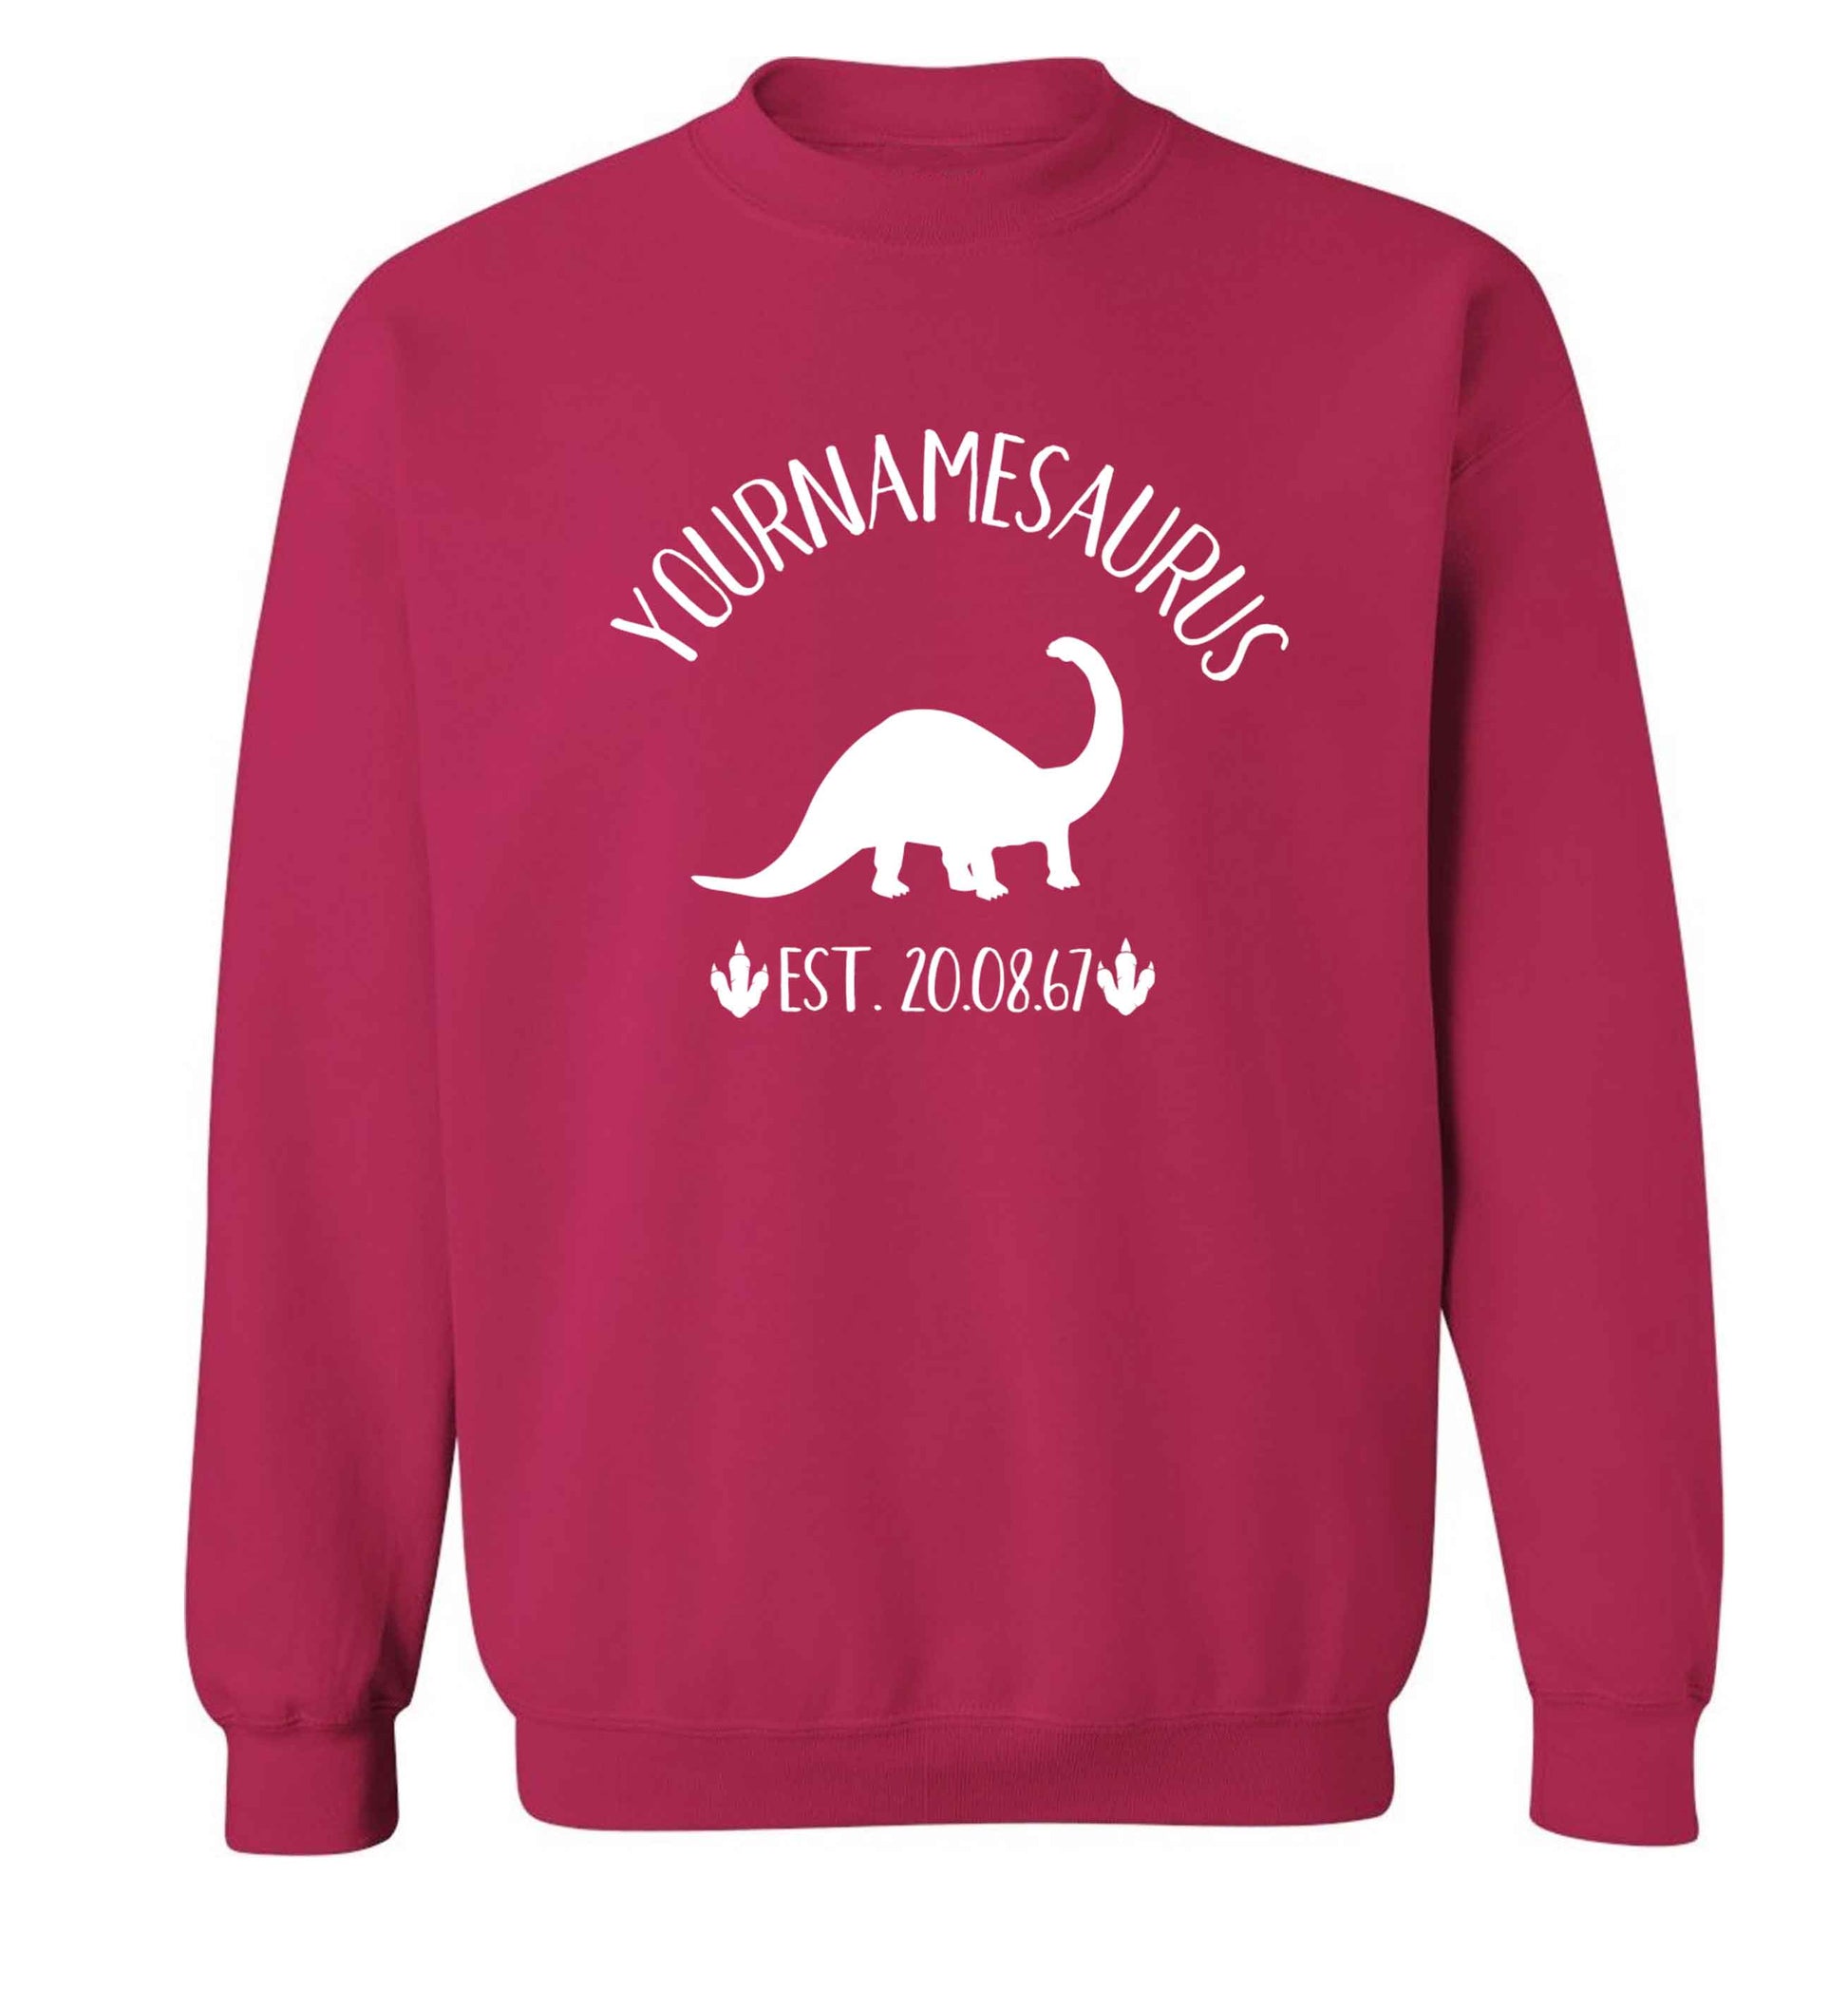 Personalised (your name) dinosaur birthday Adult's unisex pink Sweater 2XL